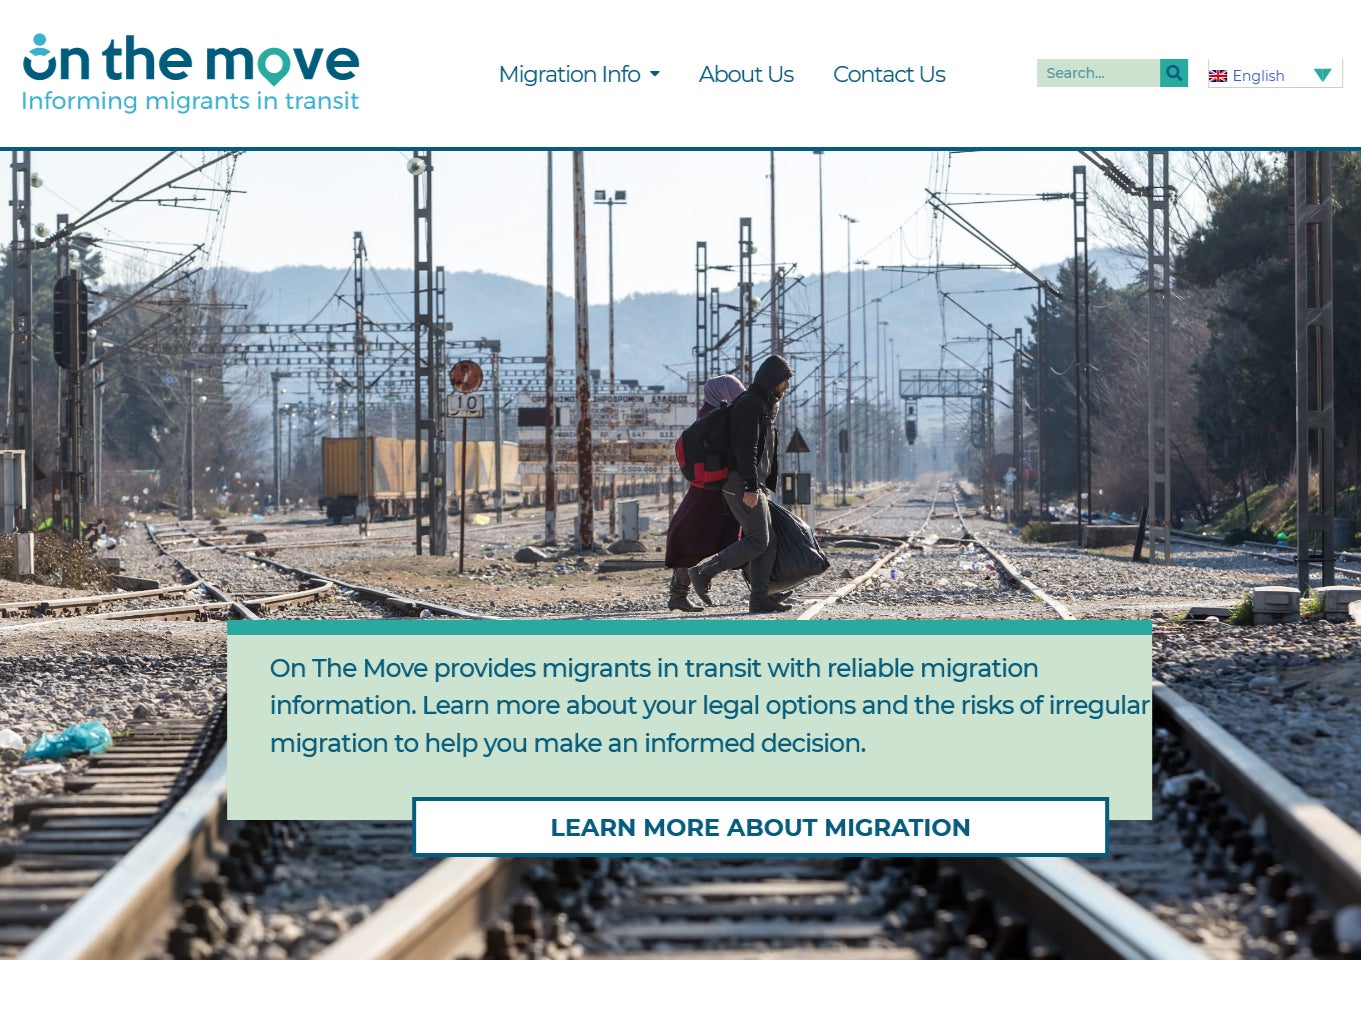 The On The Move website, which was set up by the Home Office but does not disclose its affiliation